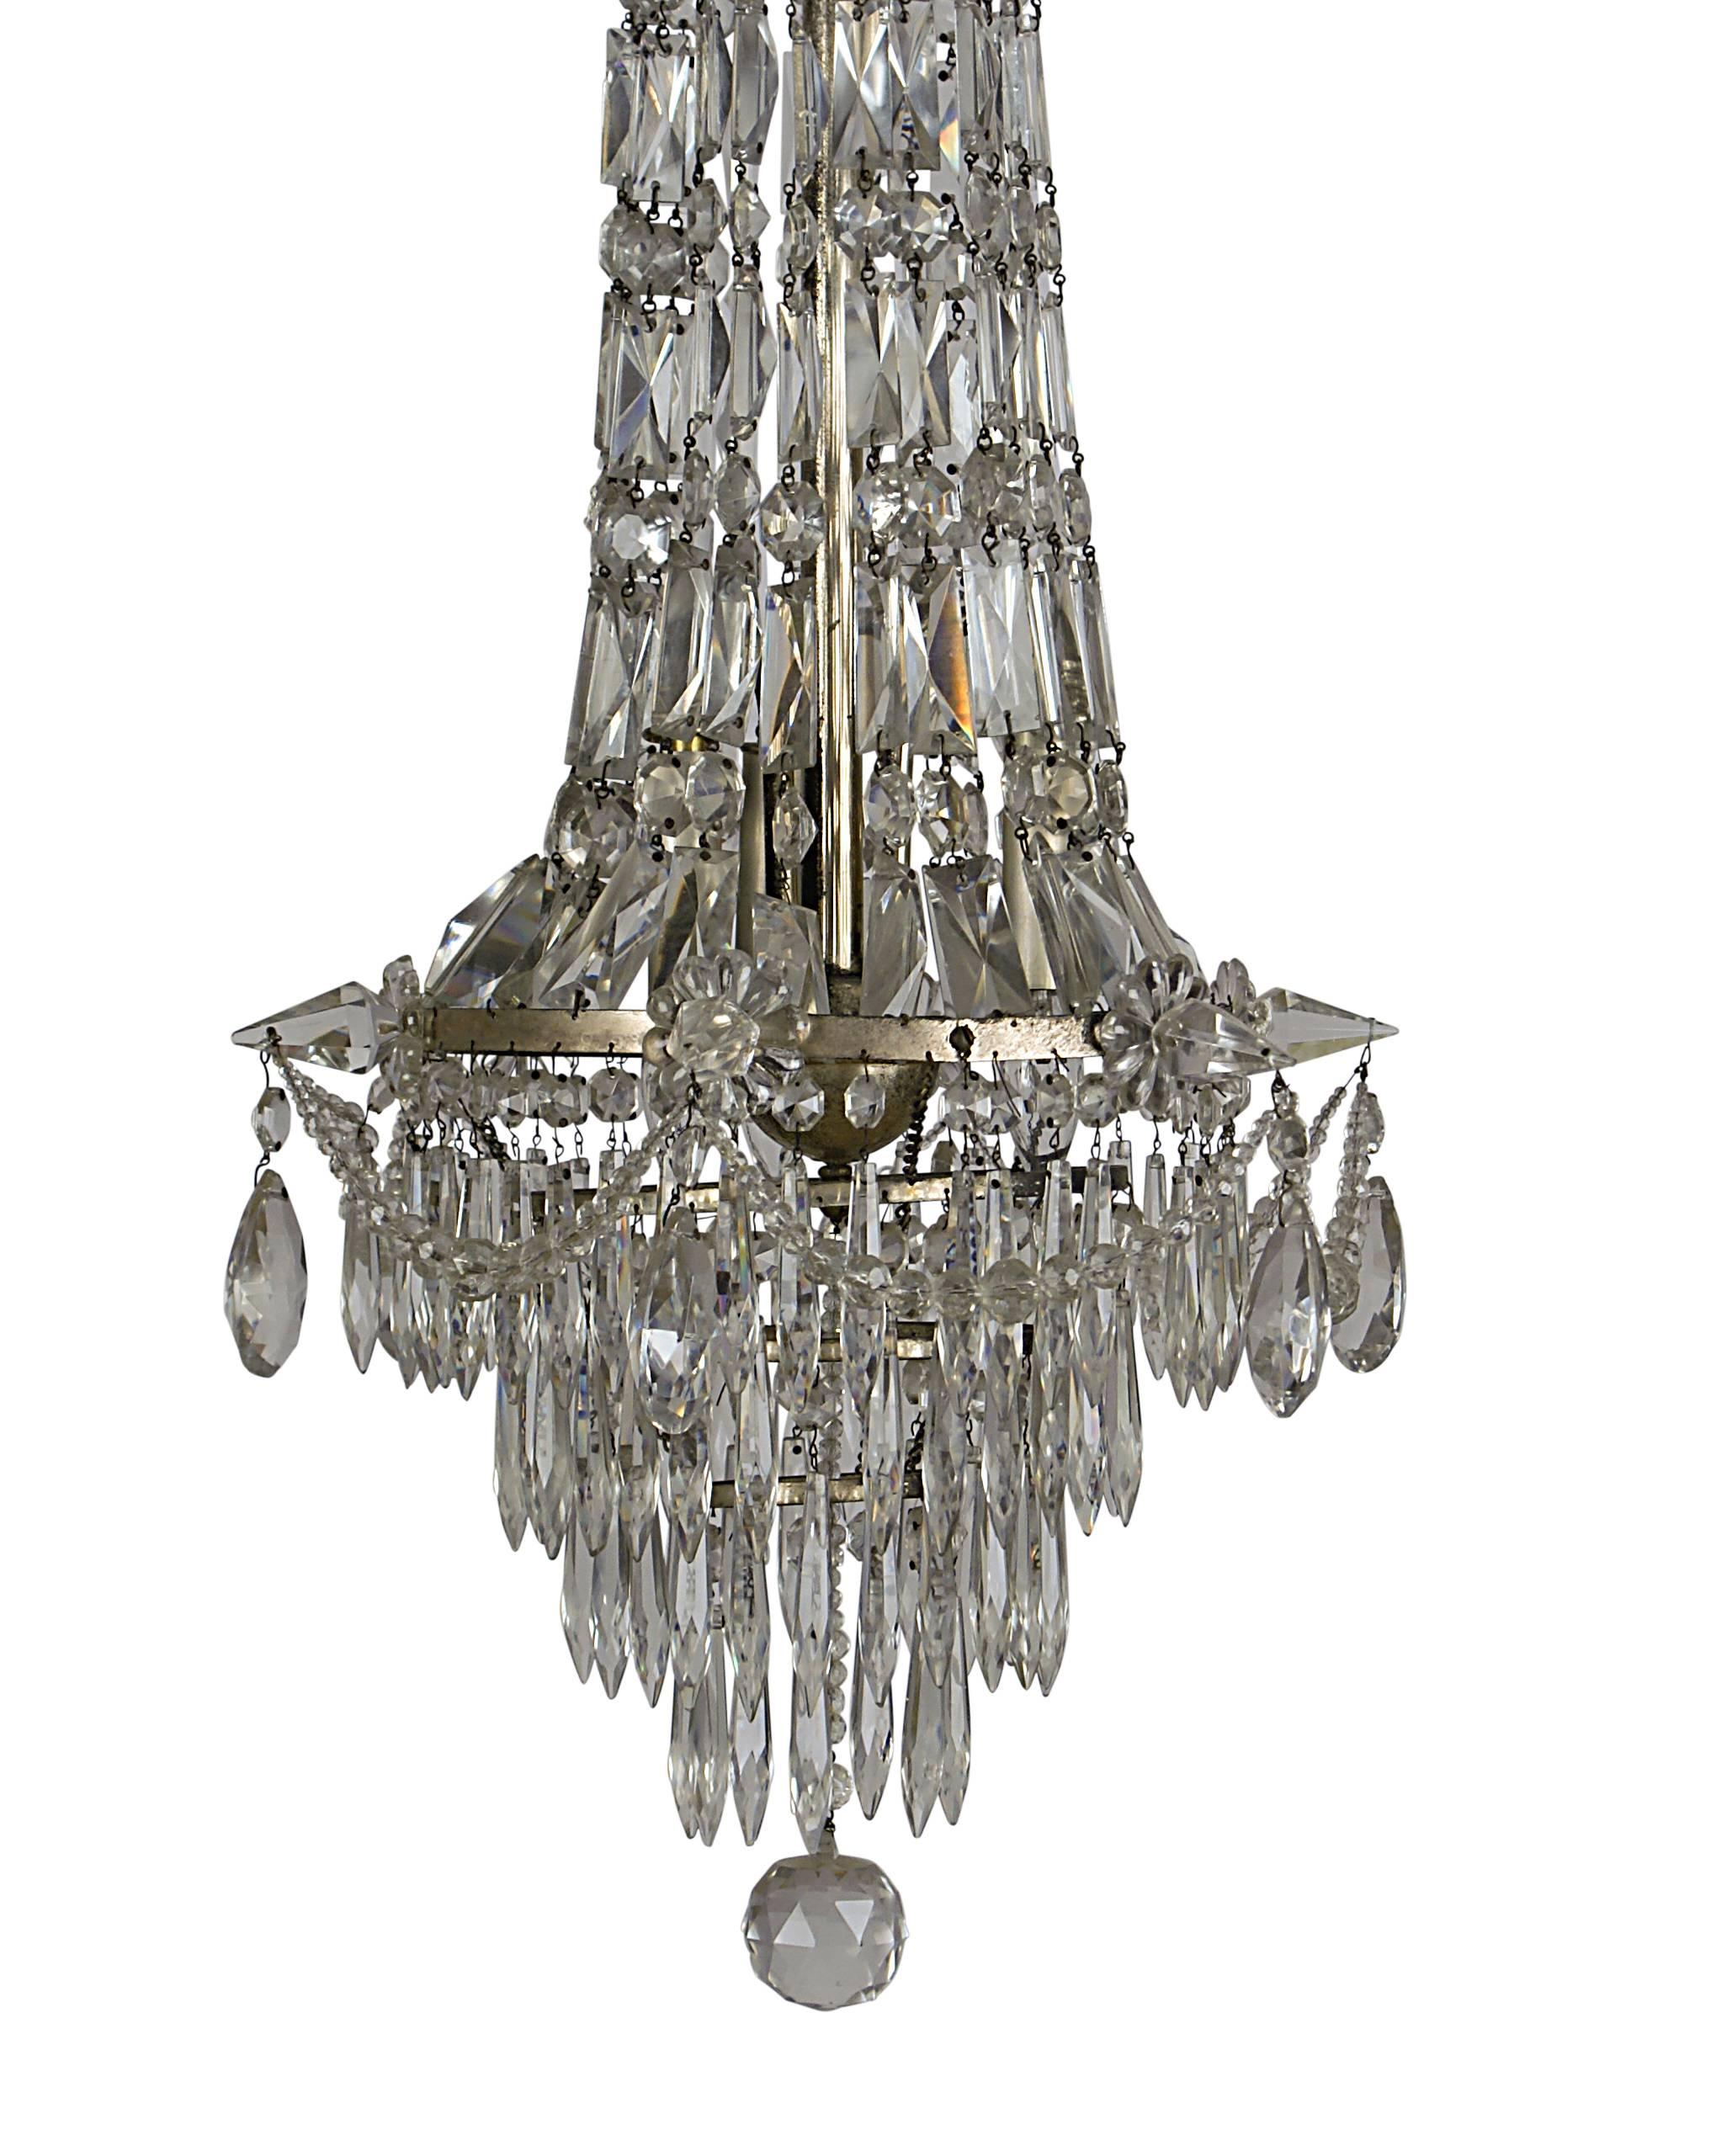 A handsome faceted and polished crystal pendant/chandelier made in France, circa 1900. Tall and narrow with light grey toned crystal. Wired recently for electricity.